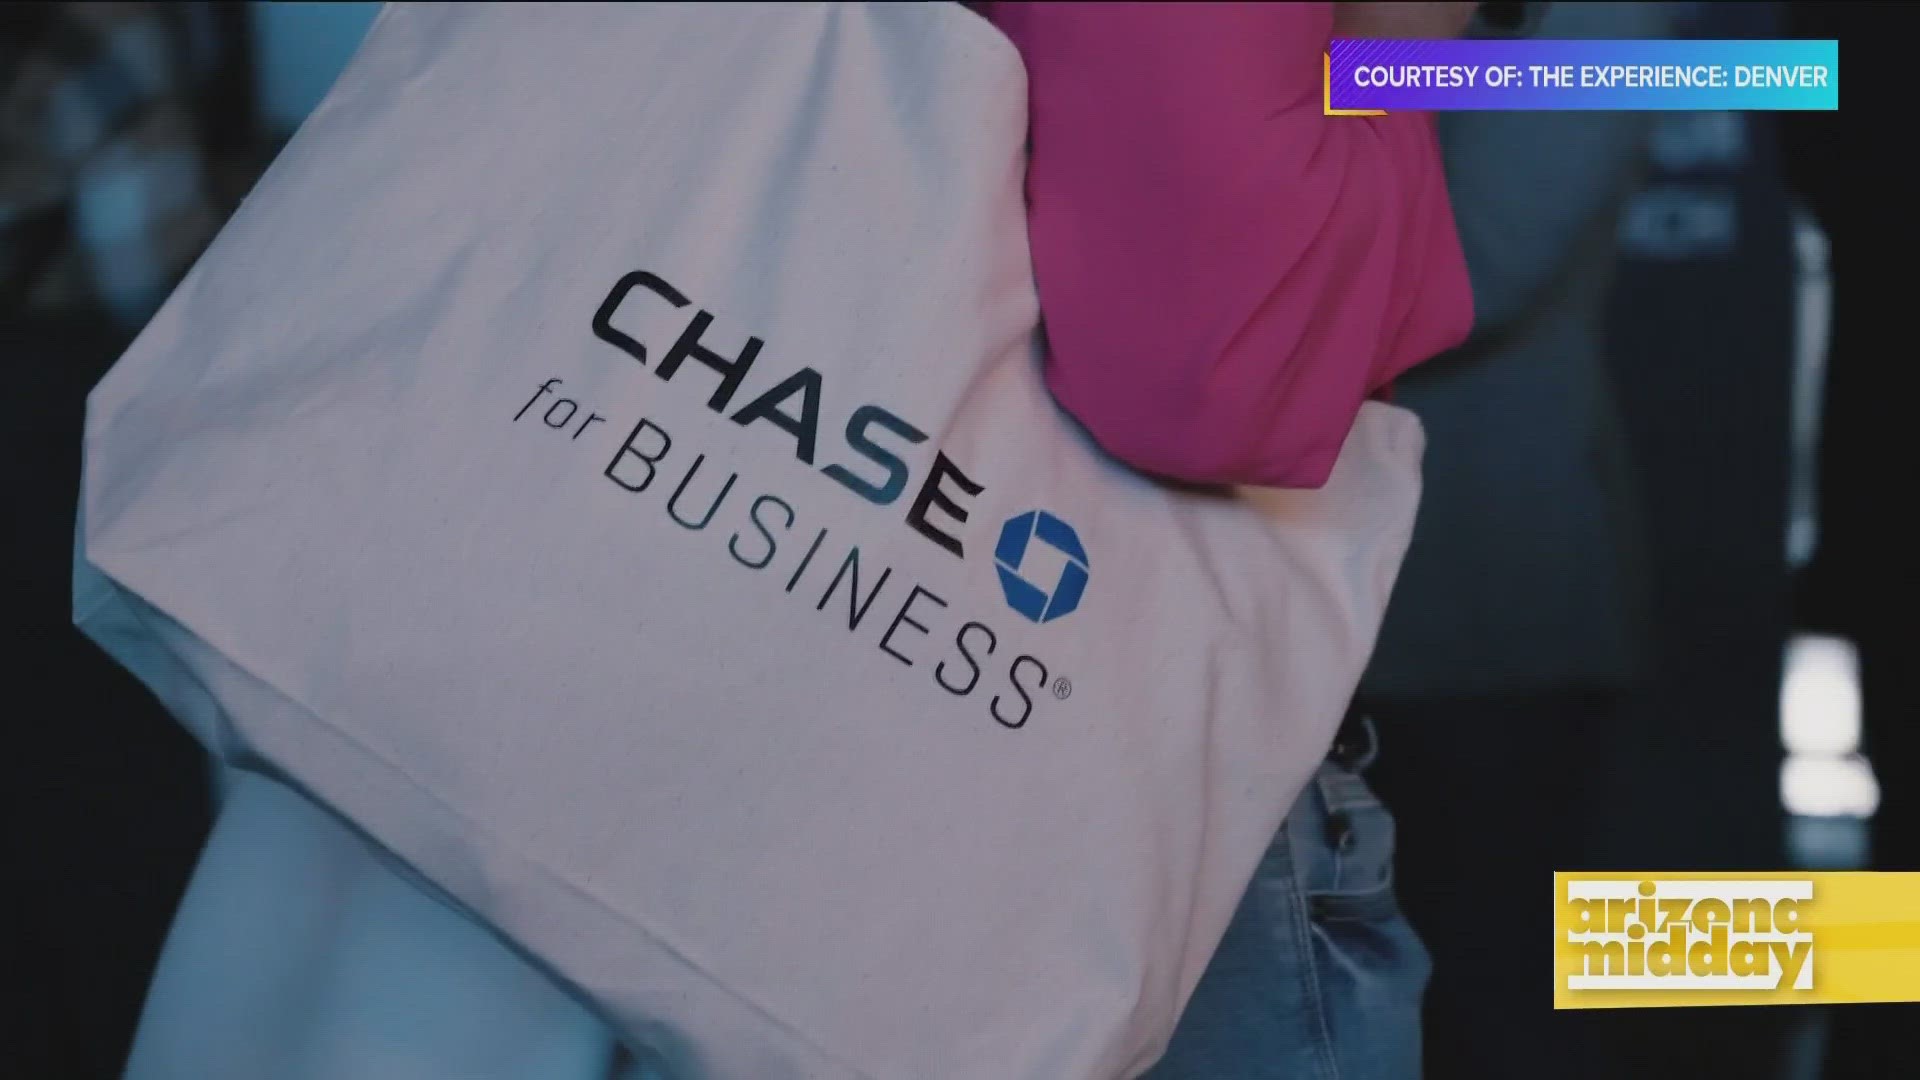 The Experience: Phoenix by Chase on March 21 will provide local business owners with consultancy, panel discussions and headshots - all free of charge.